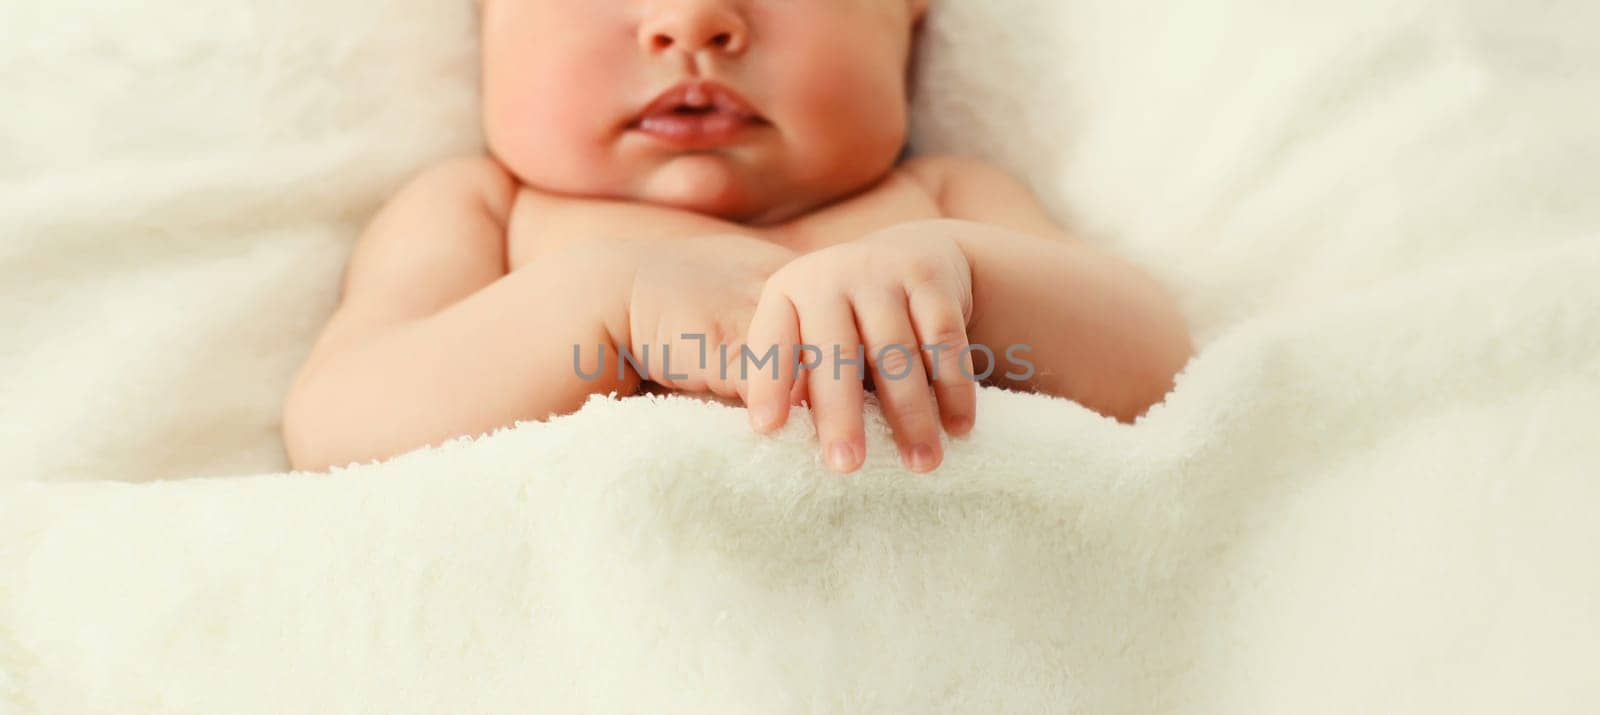 Close up portrait of infant sweet sleeping lying on white bed at home